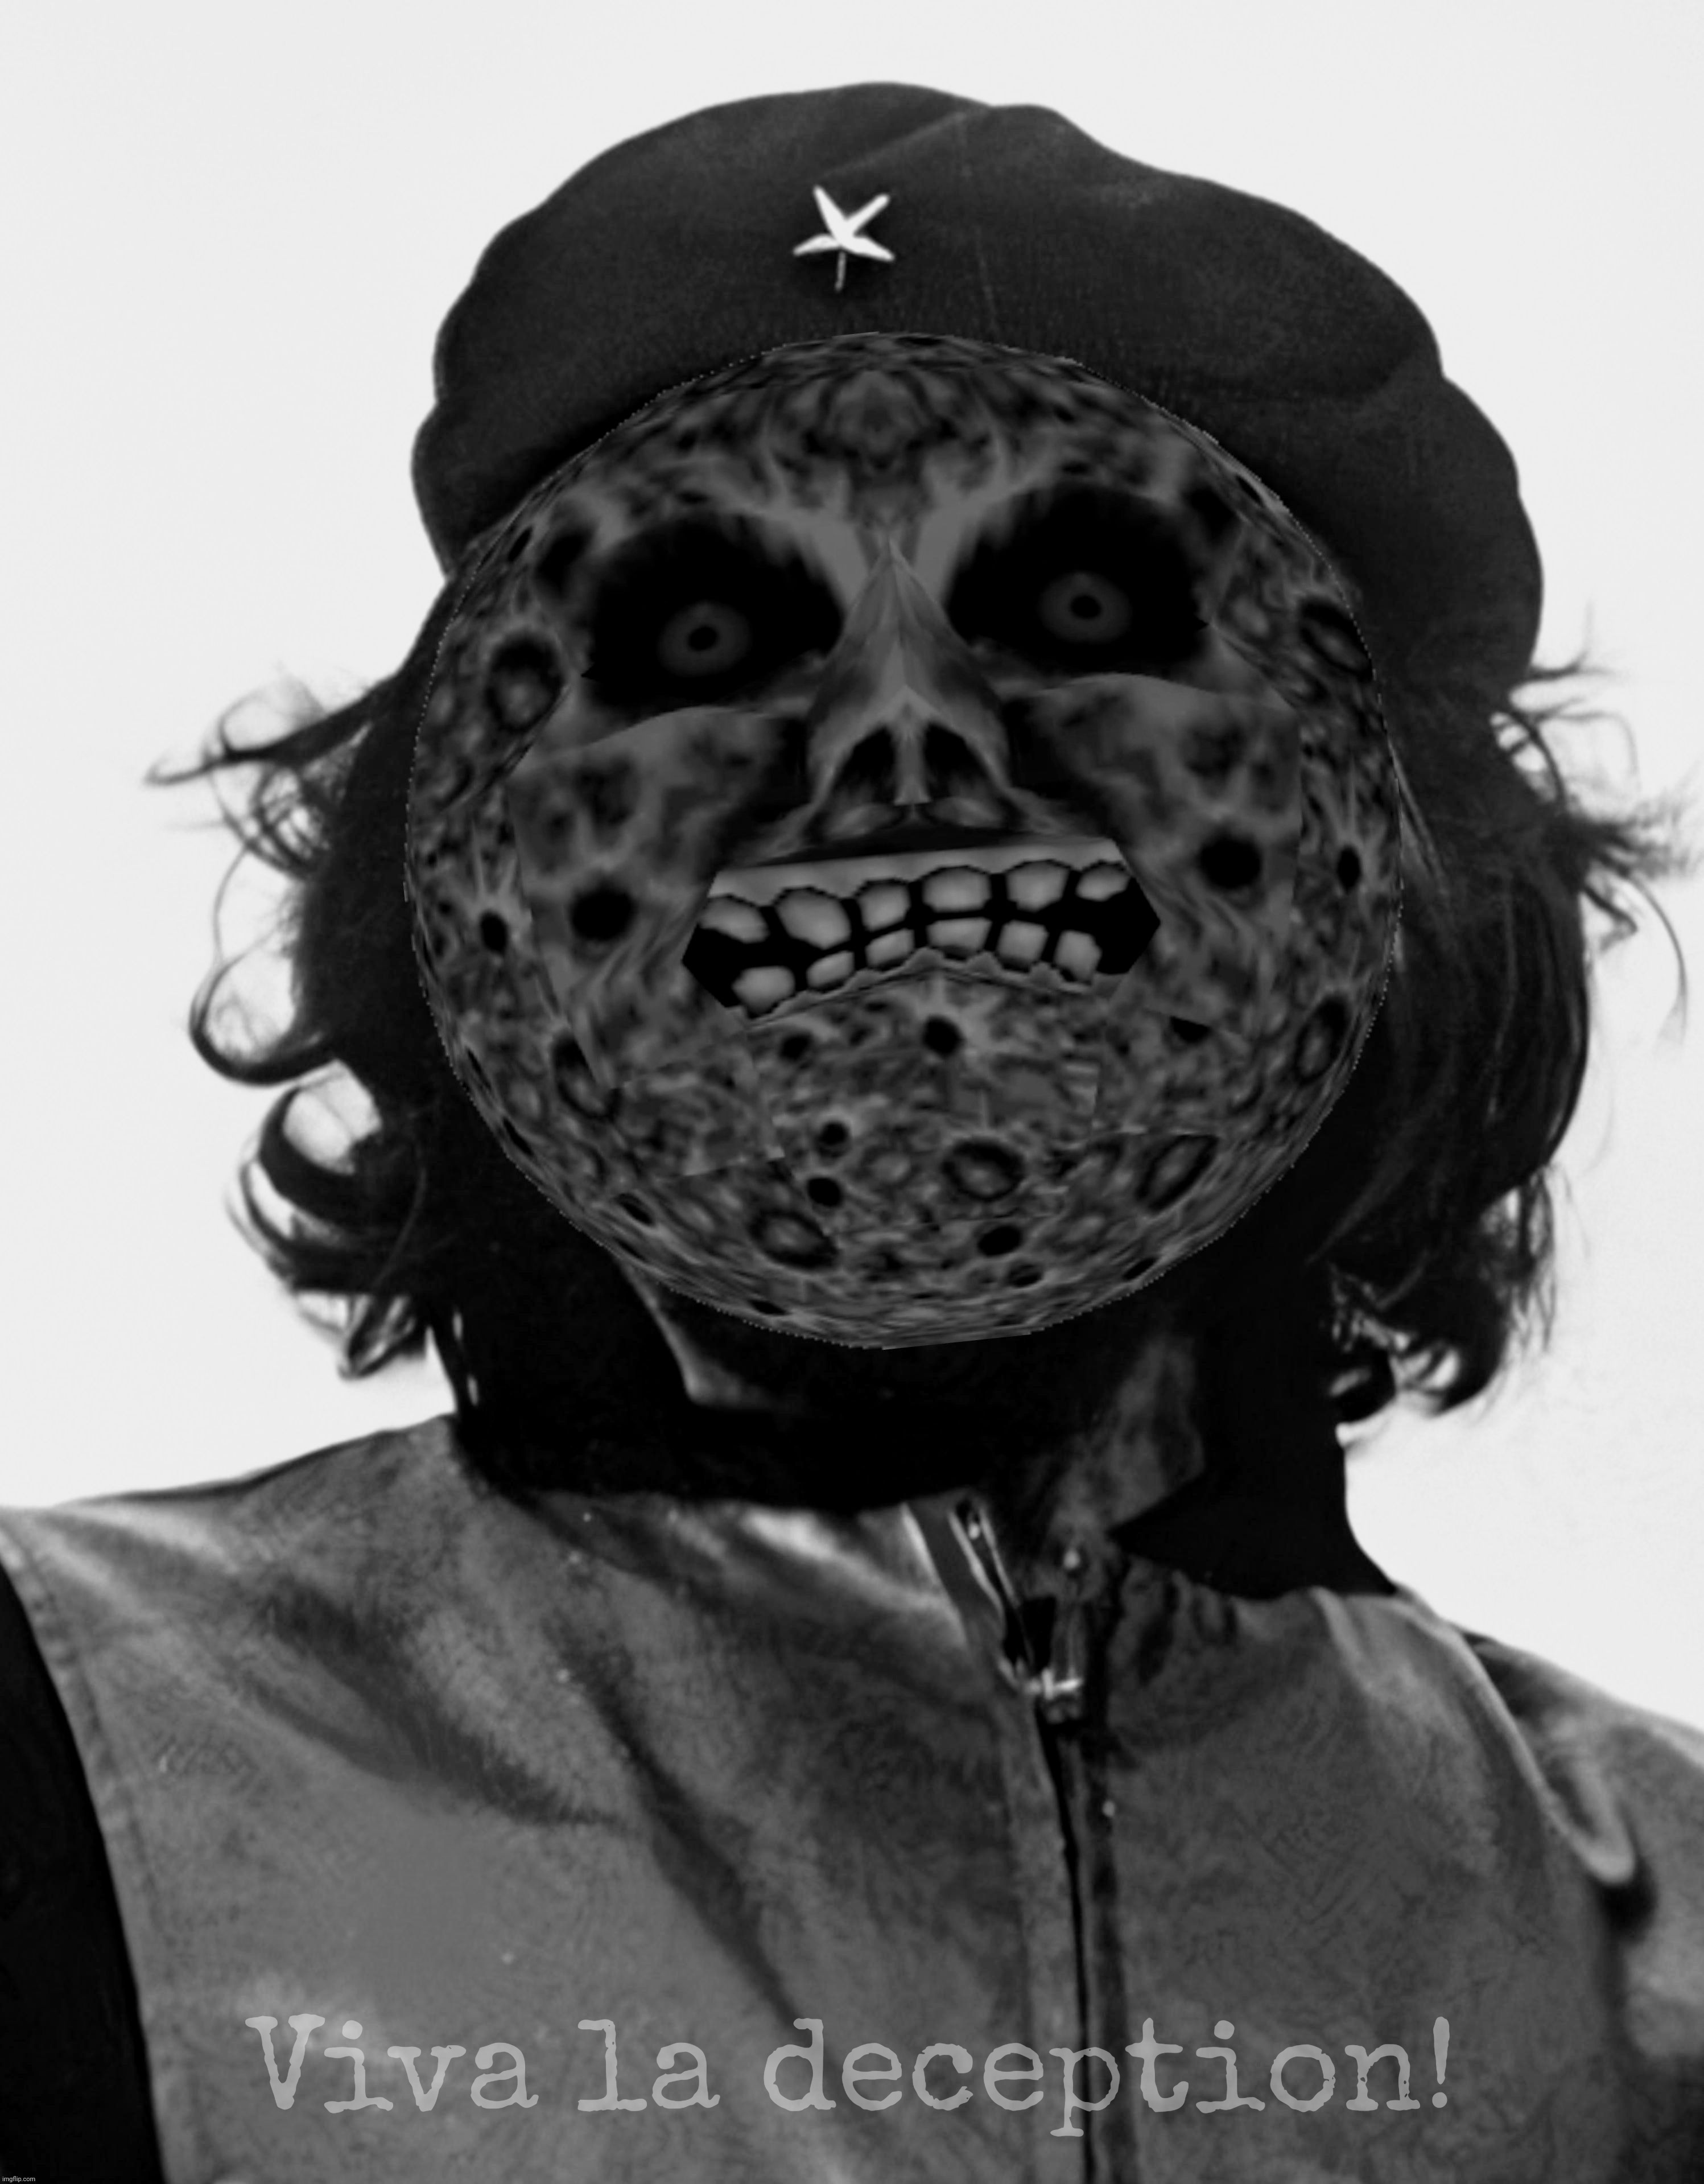 When the moon hits your eye like a murdering che pizza pie | Viva la deception! | image tagged in che,che guevara,lunar,moonie,when the moon hits your eye like a murdering che pizza pie,che was emo | made w/ Imgflip meme maker